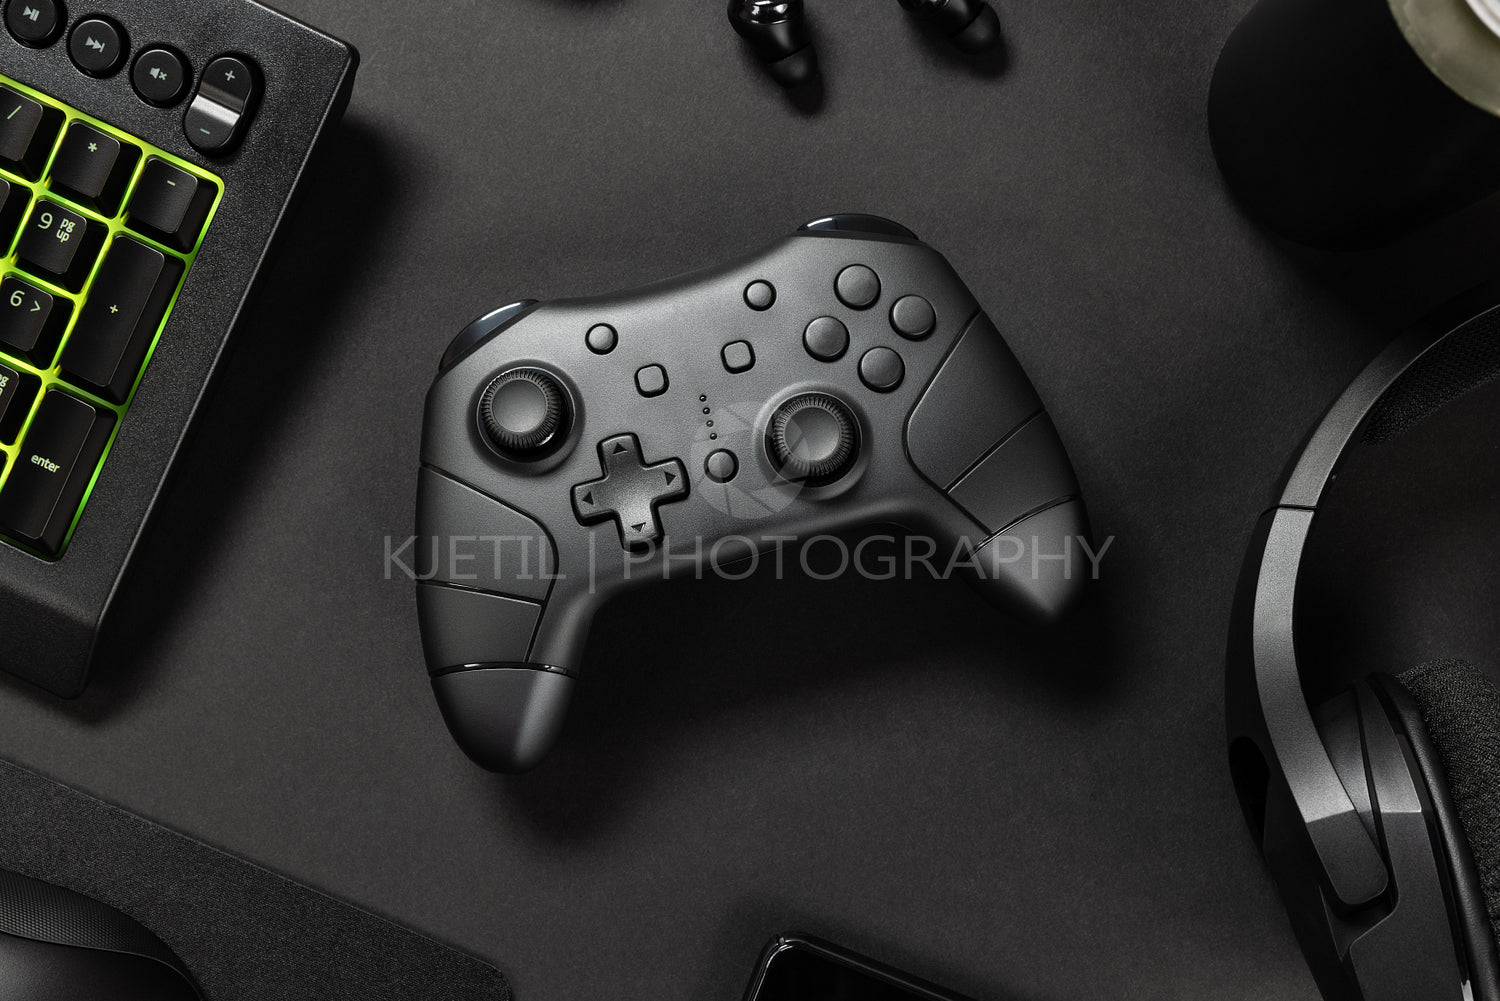 Controller with green lit keyboard amidst various wireless devices